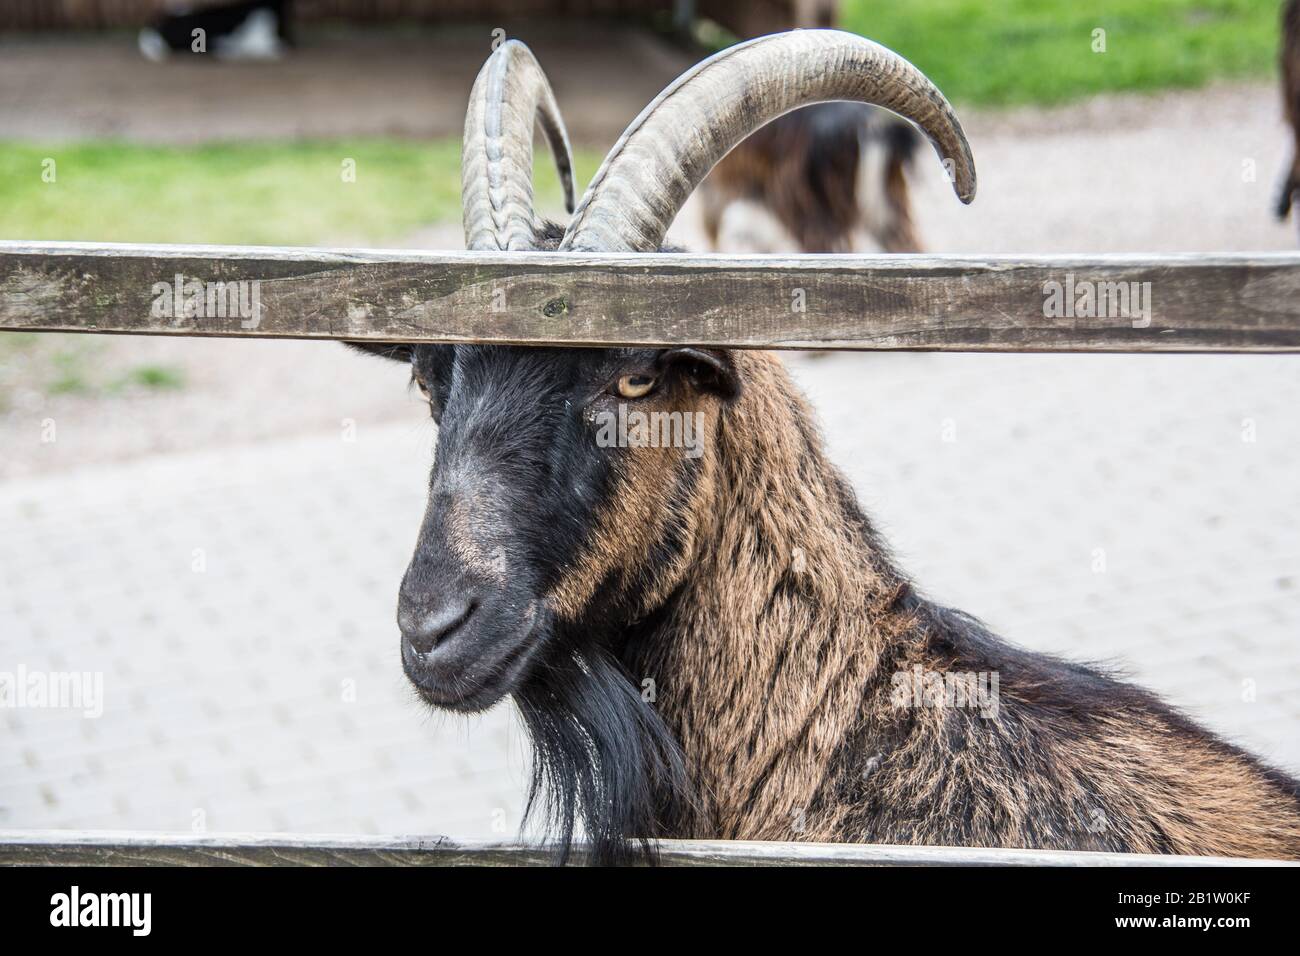 Domestic goats with boards in front of their heads Stock Photo